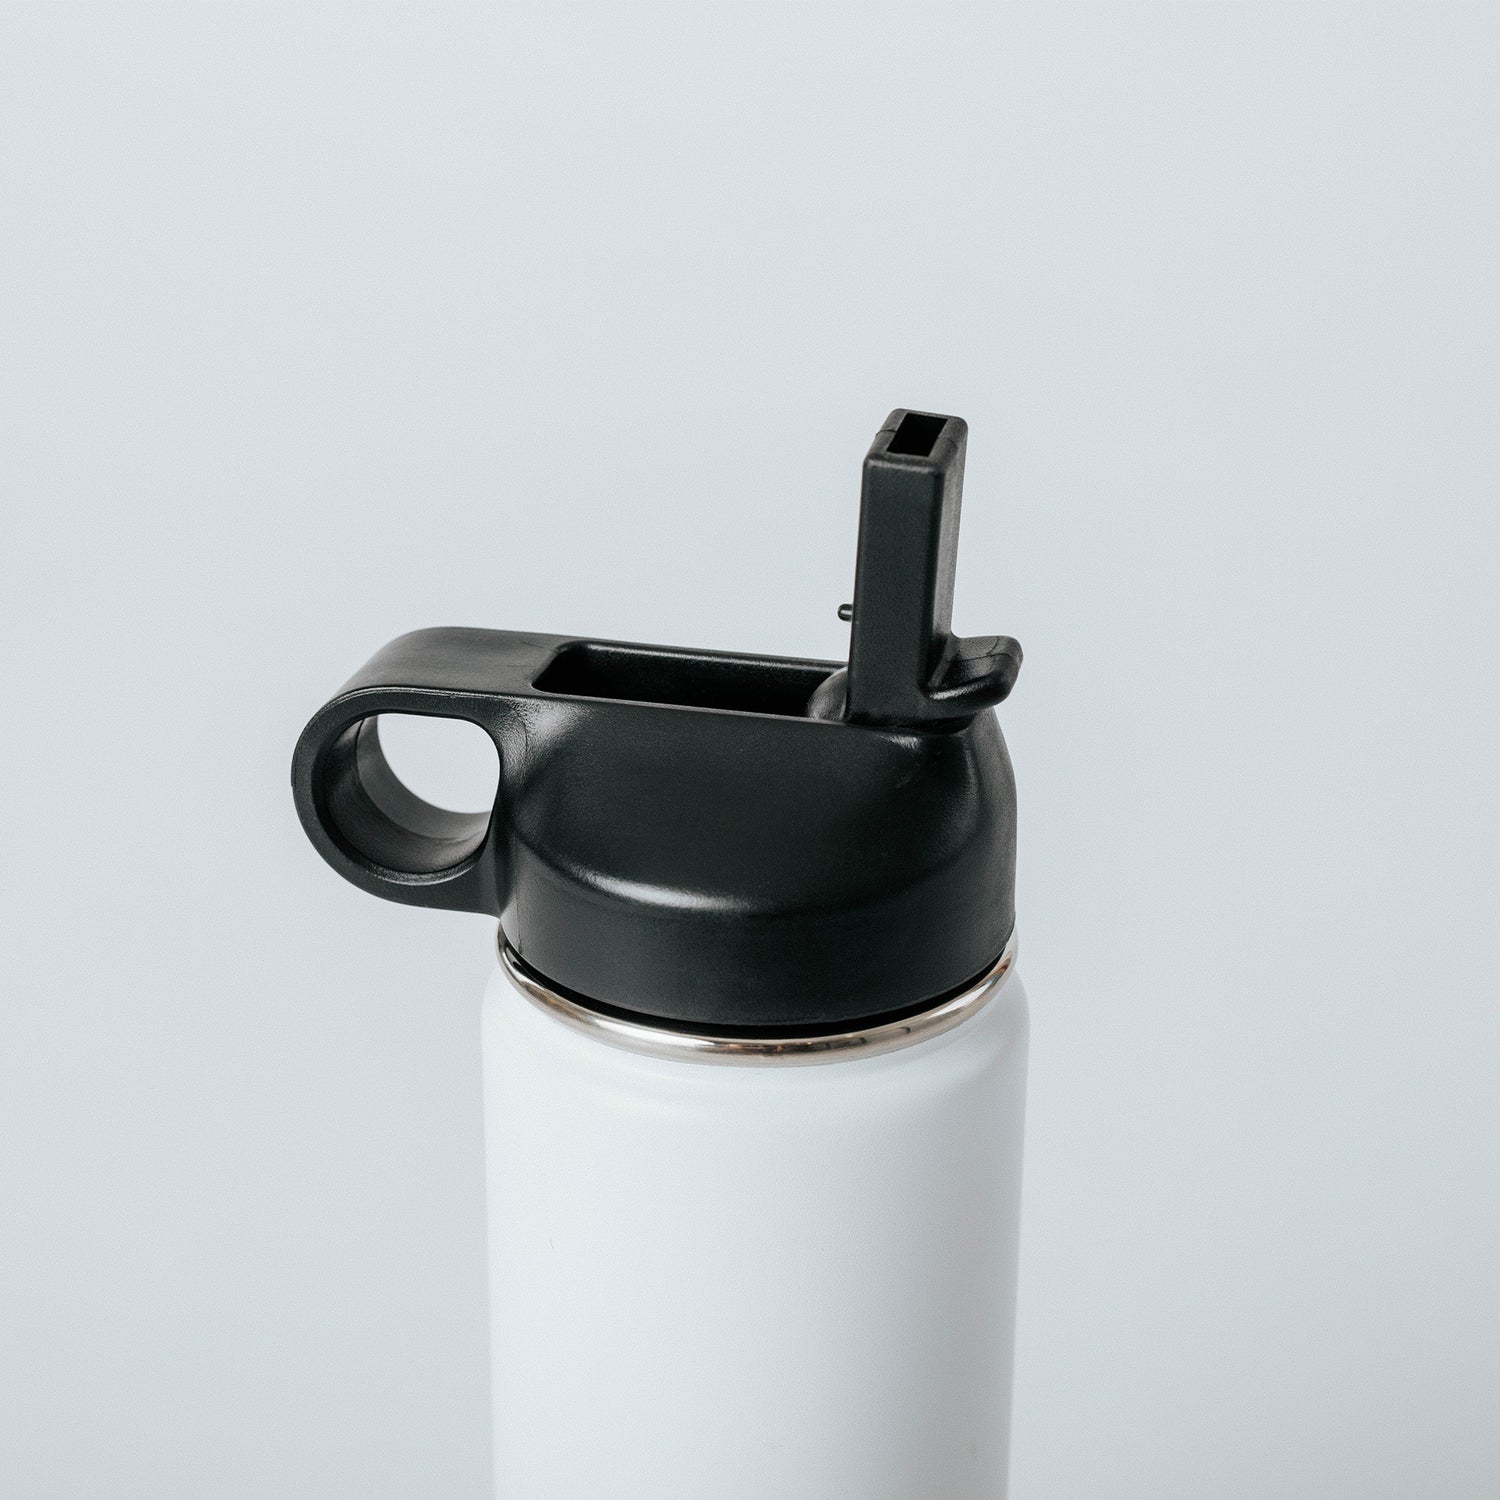 Insulated Water Bottle 700ml - White